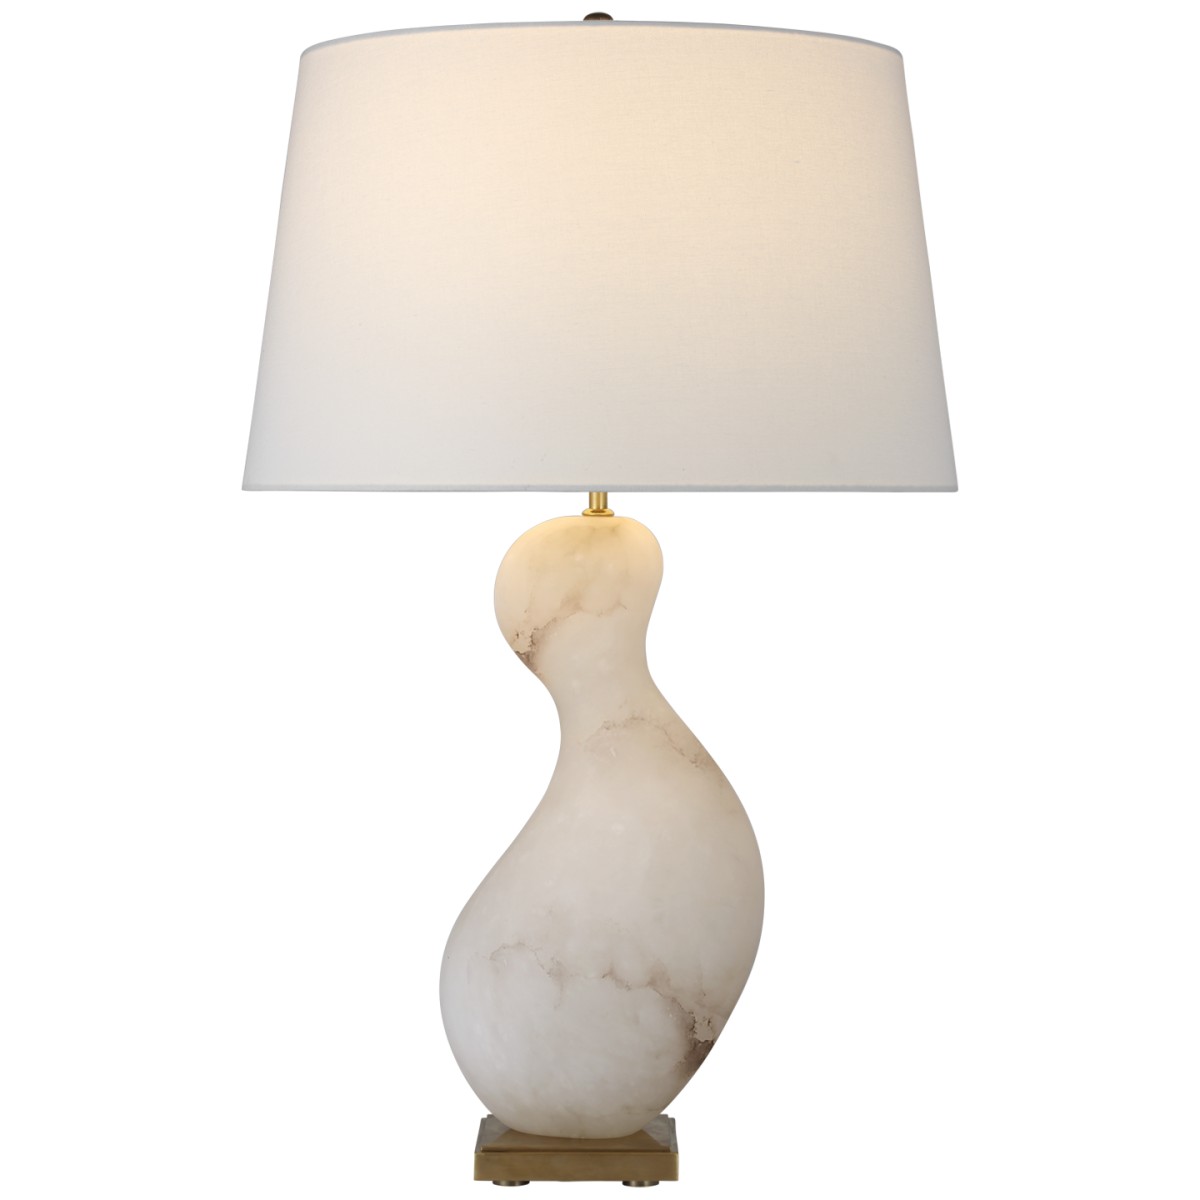 Bree Large Table Lamp with Linen Shade